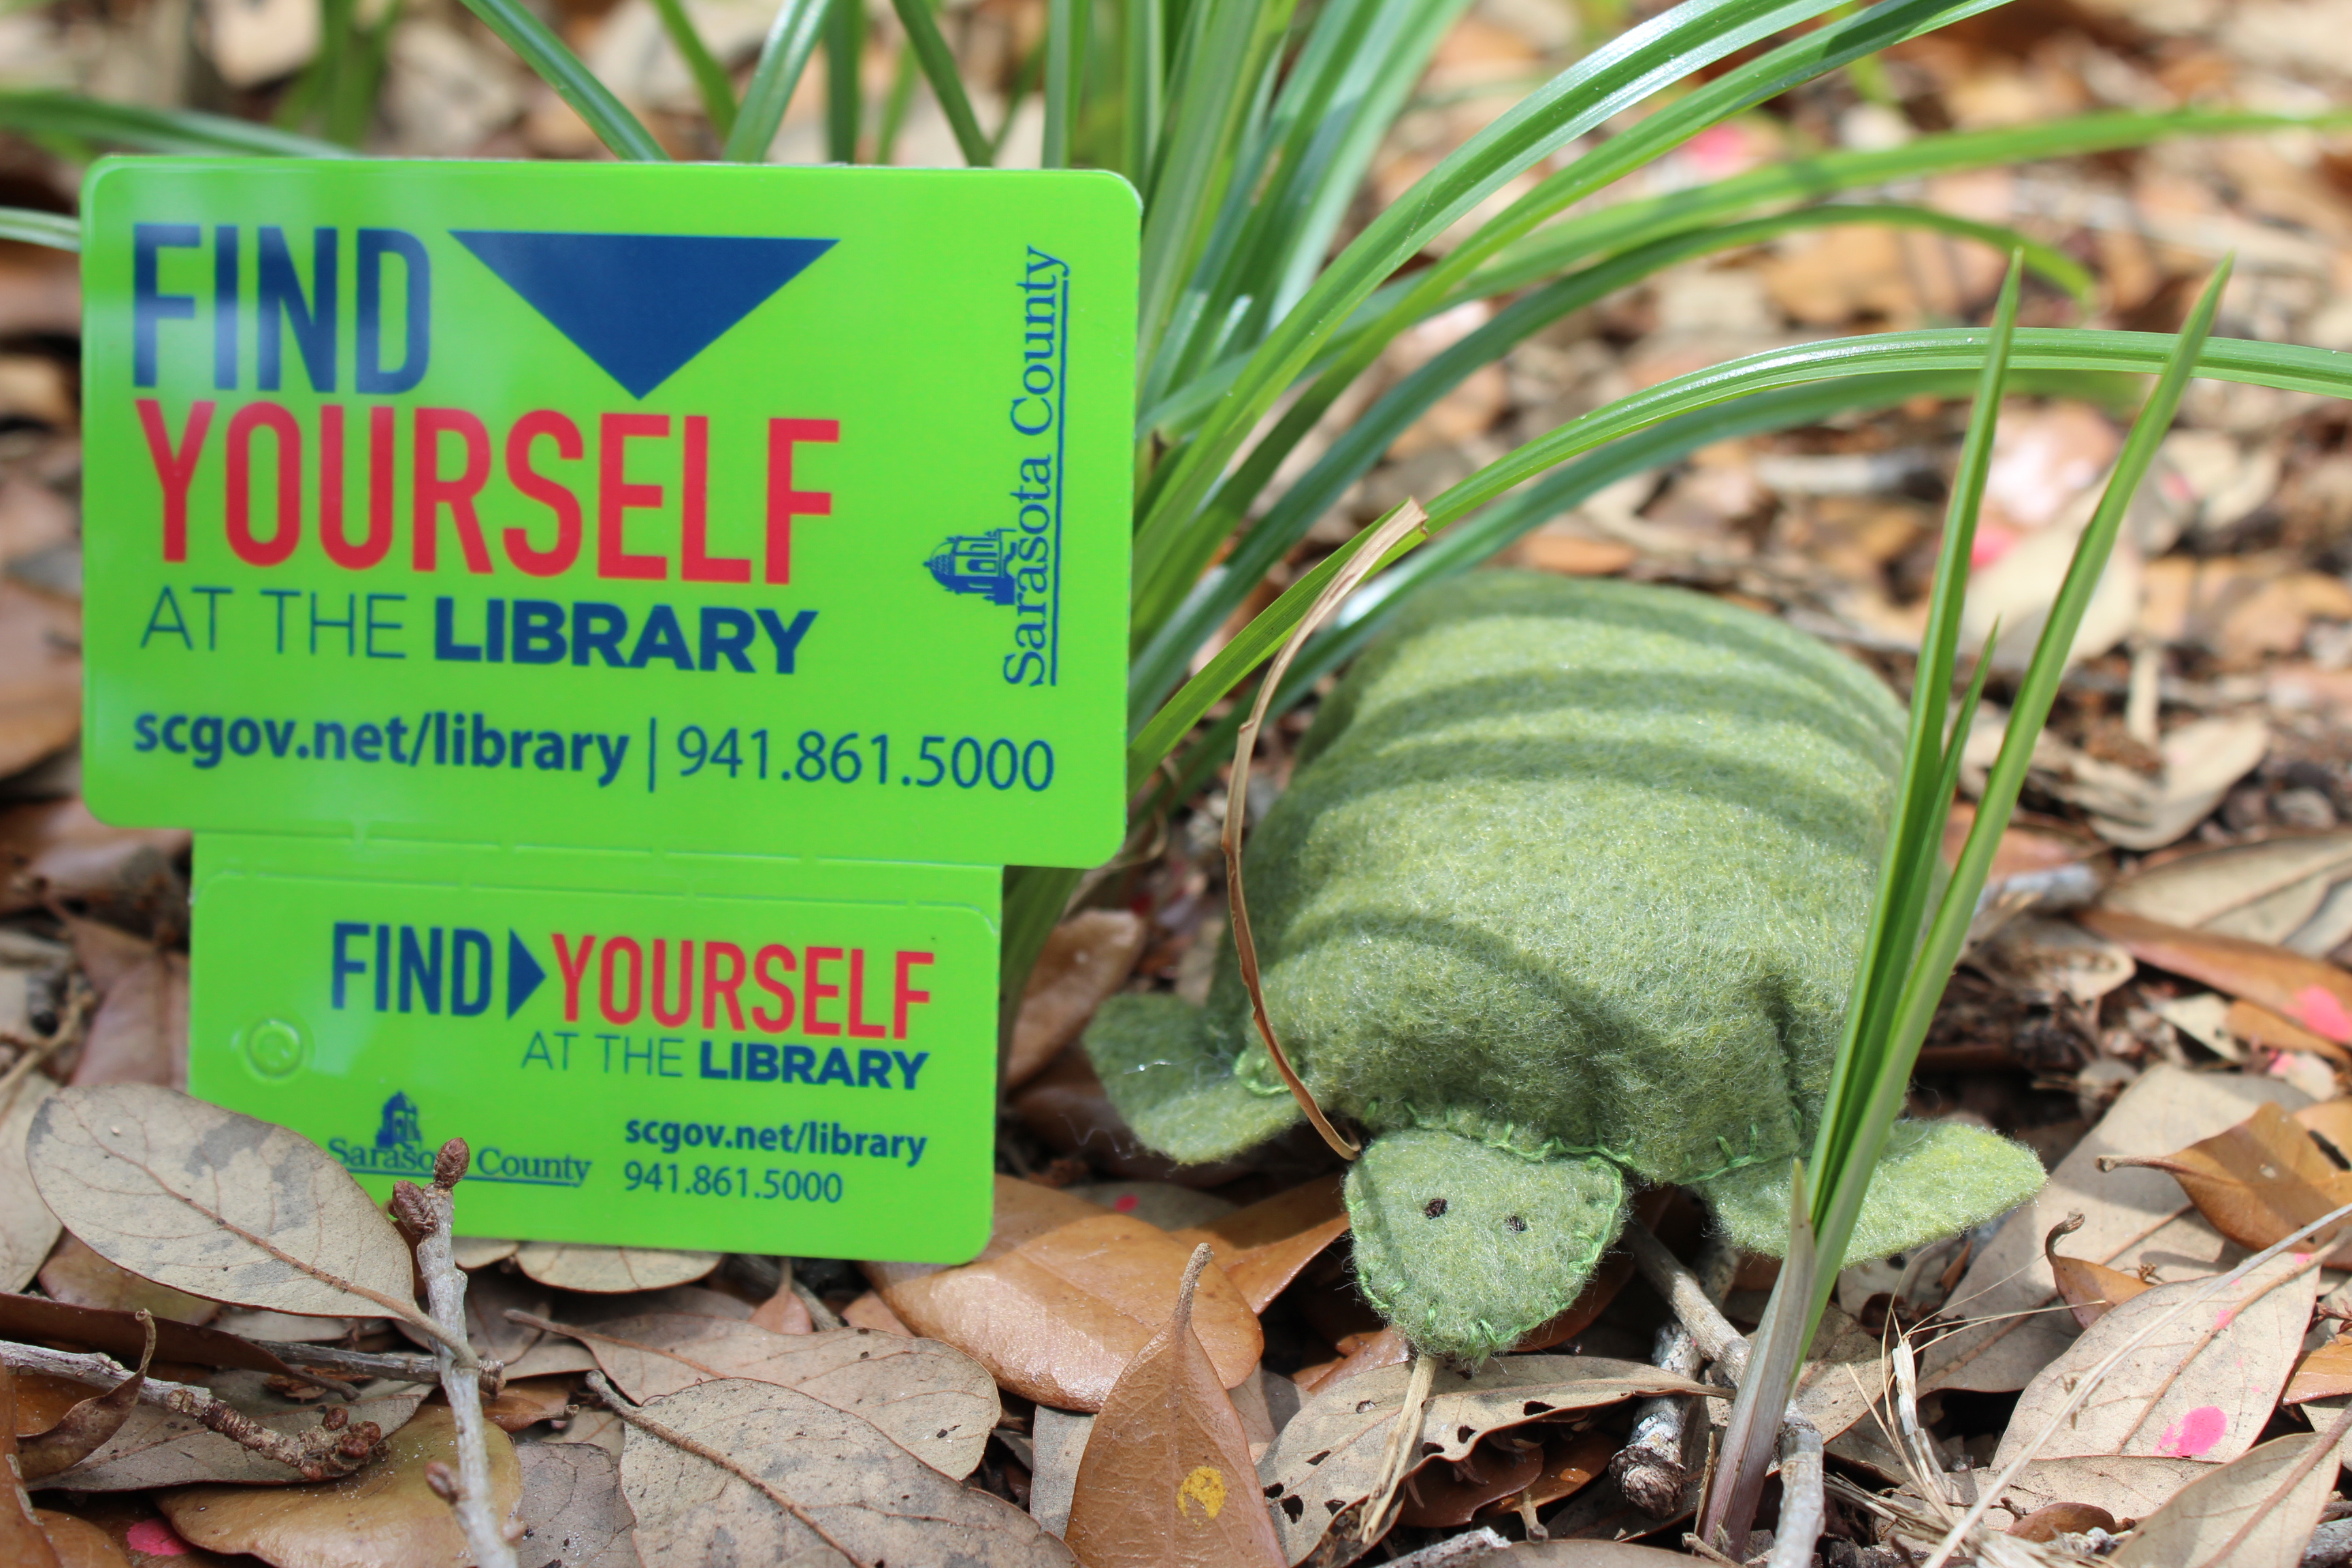 Sewn gopher tortoise with library card